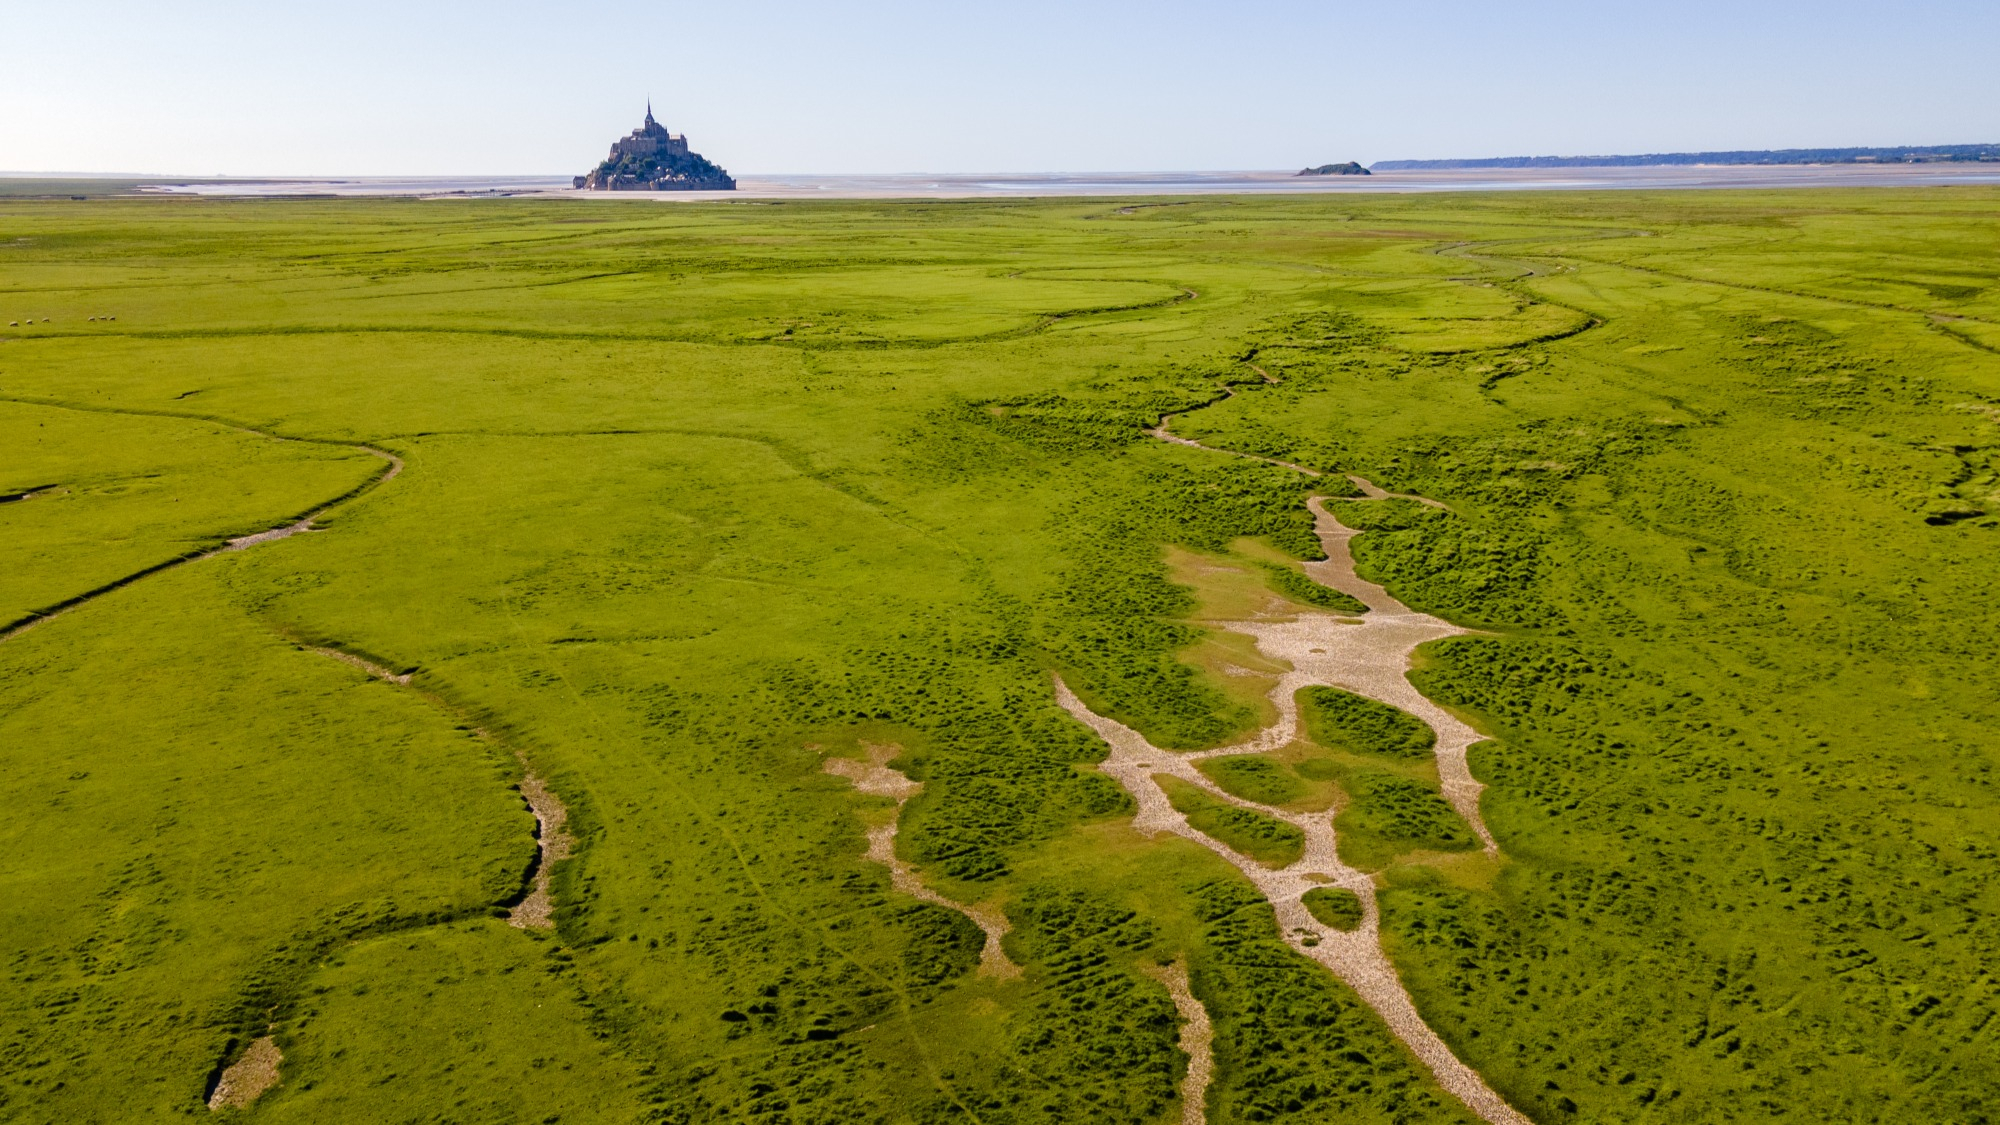 An aerial view of Mont Saint-Michel in northern France. The Paris Basin region is known for prehistoric funerary sites archaeologists use to study early neolithic settlements.